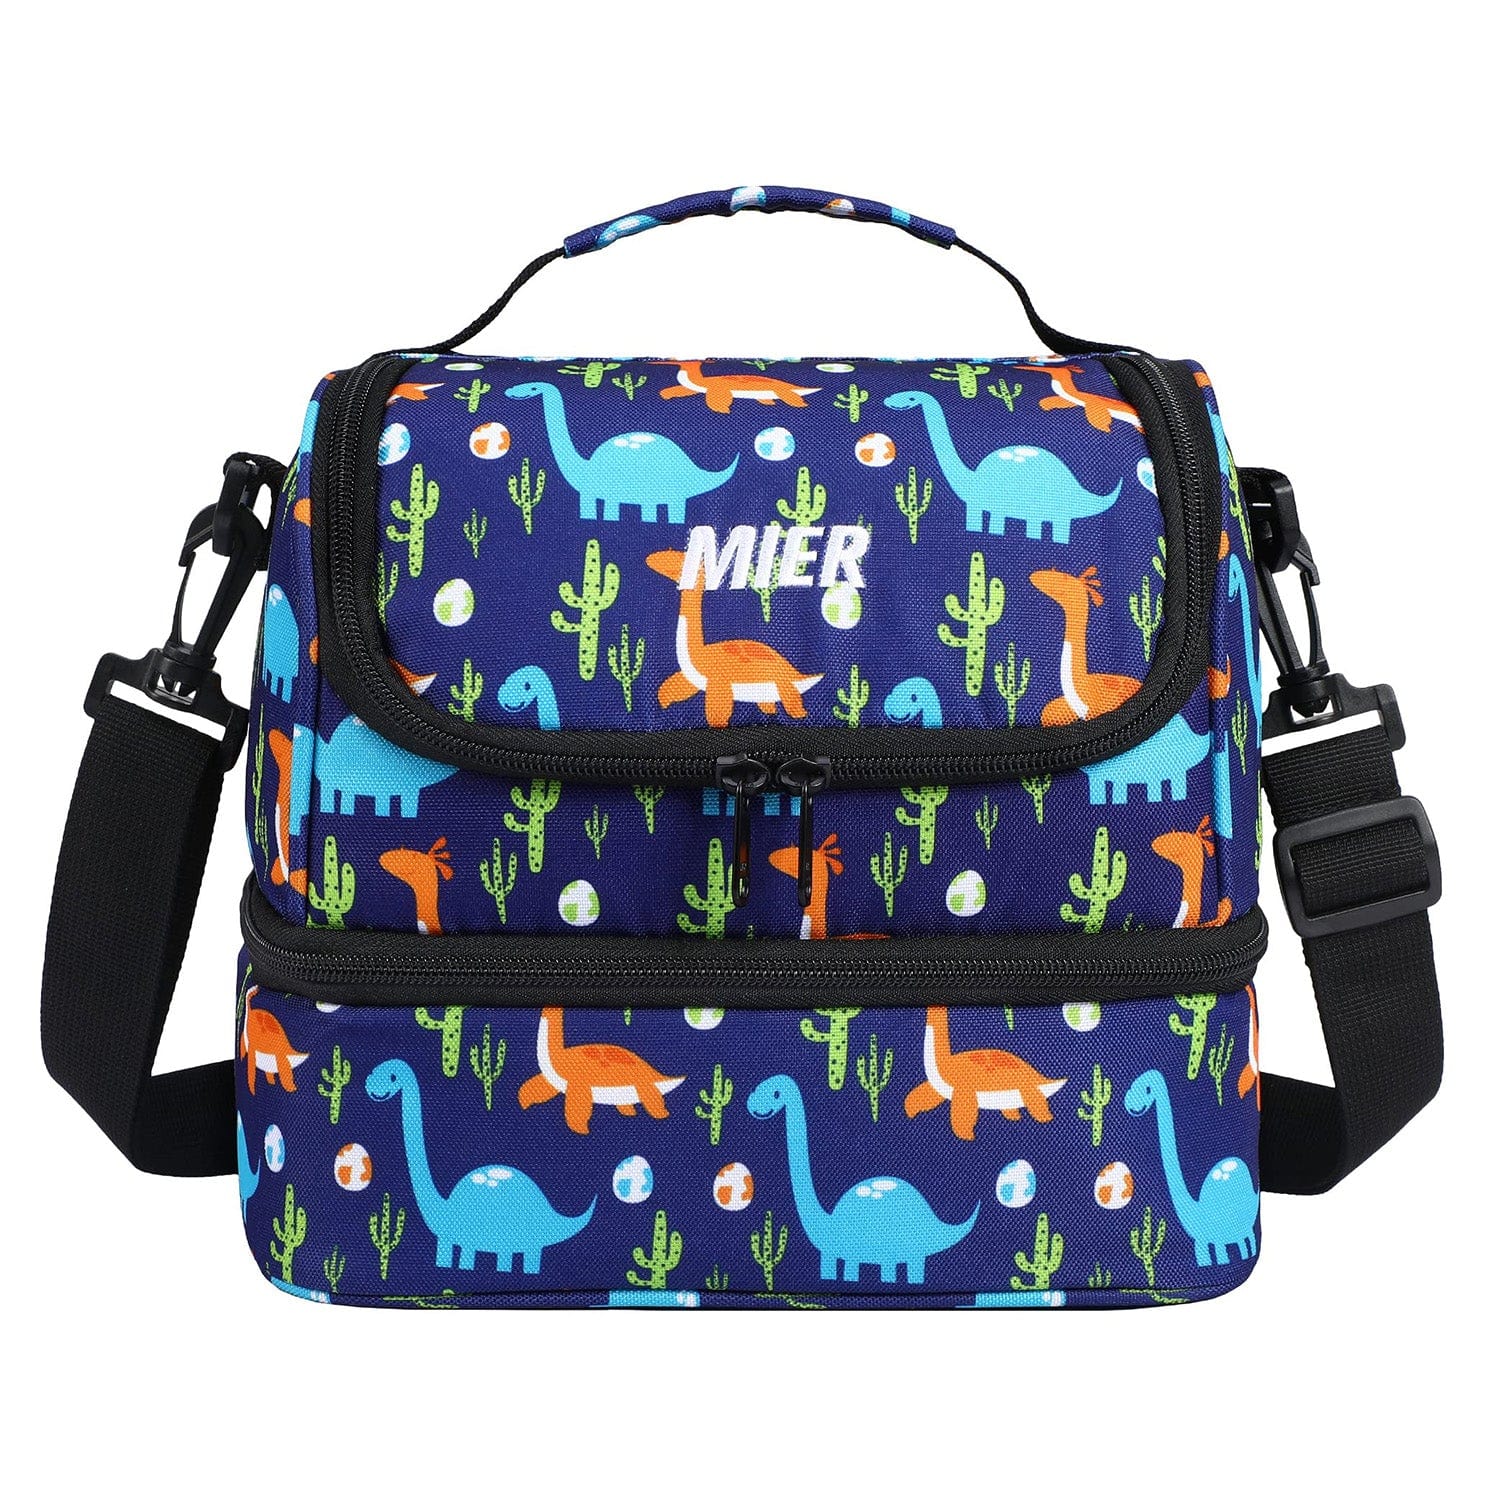 MIER 2 Compartment Kids Small Lunch Box Bag for Boys Girls Toddlers, Adult  Leakproof Cooler Insulate…See more MIER 2 Compartment Kids Small Lunch Box